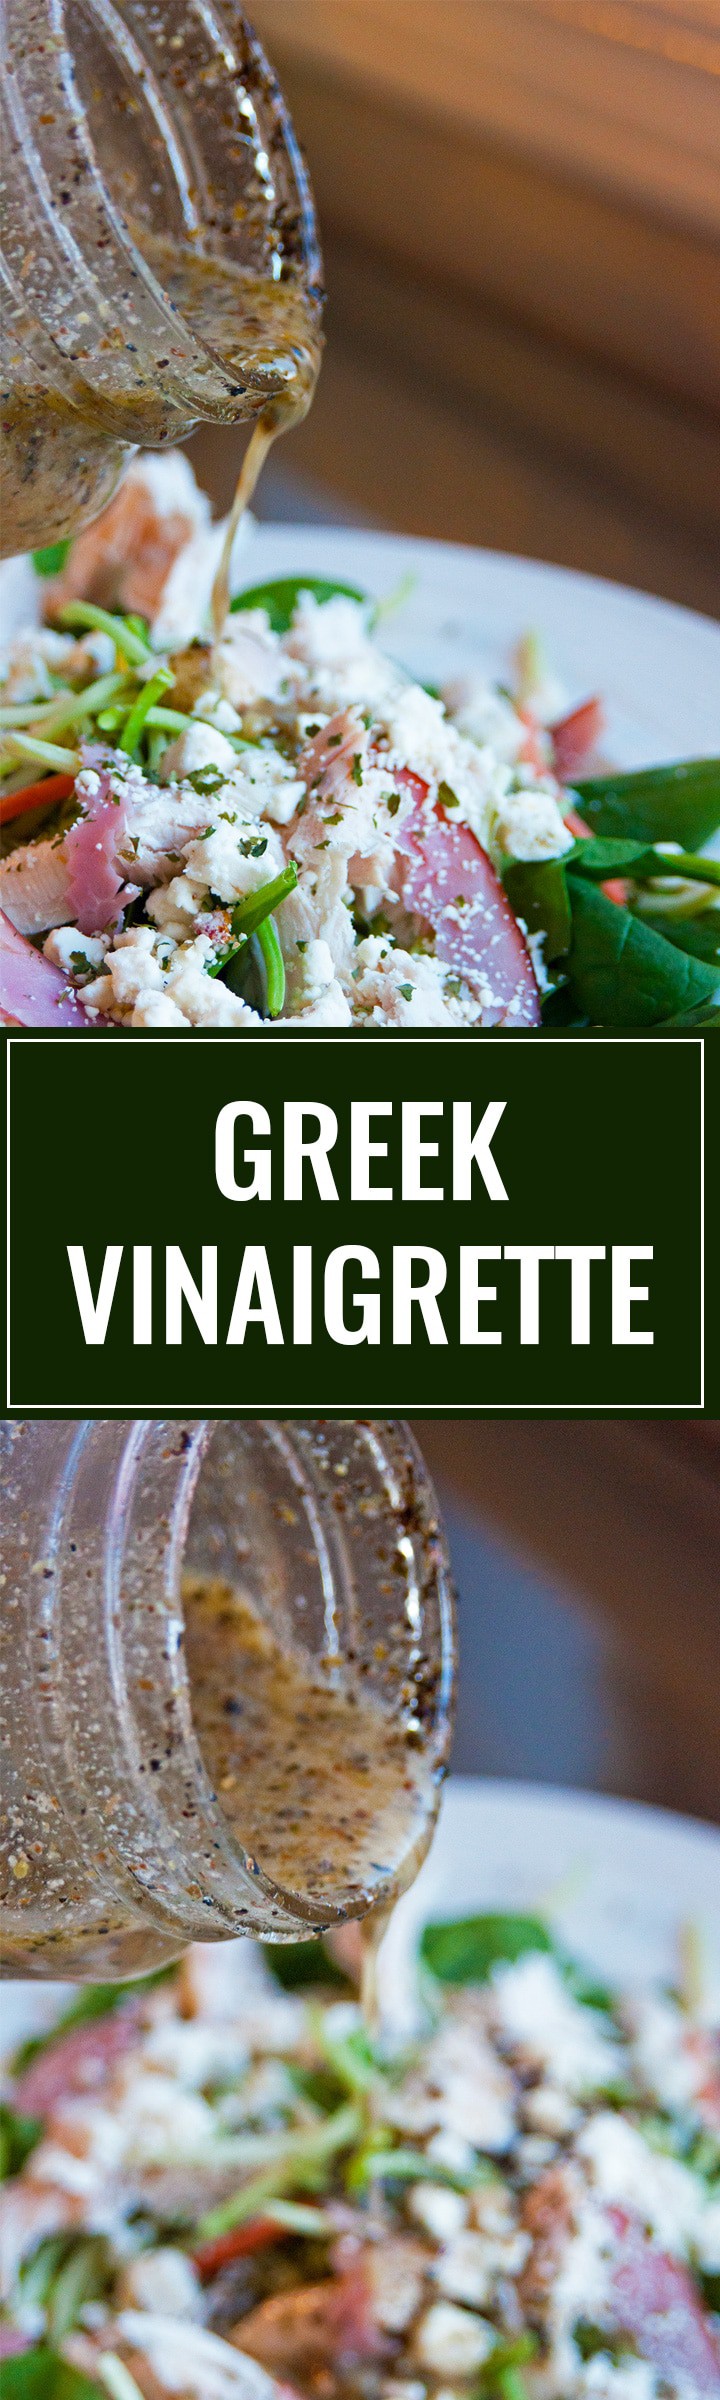 Homemade Greek Vinaigrette. This homemade salad dressing is delicious over salads, as a marinade and on a greek pizza! This healthy recipe packs a clean eating punch! | thebewitchinkitchen.com